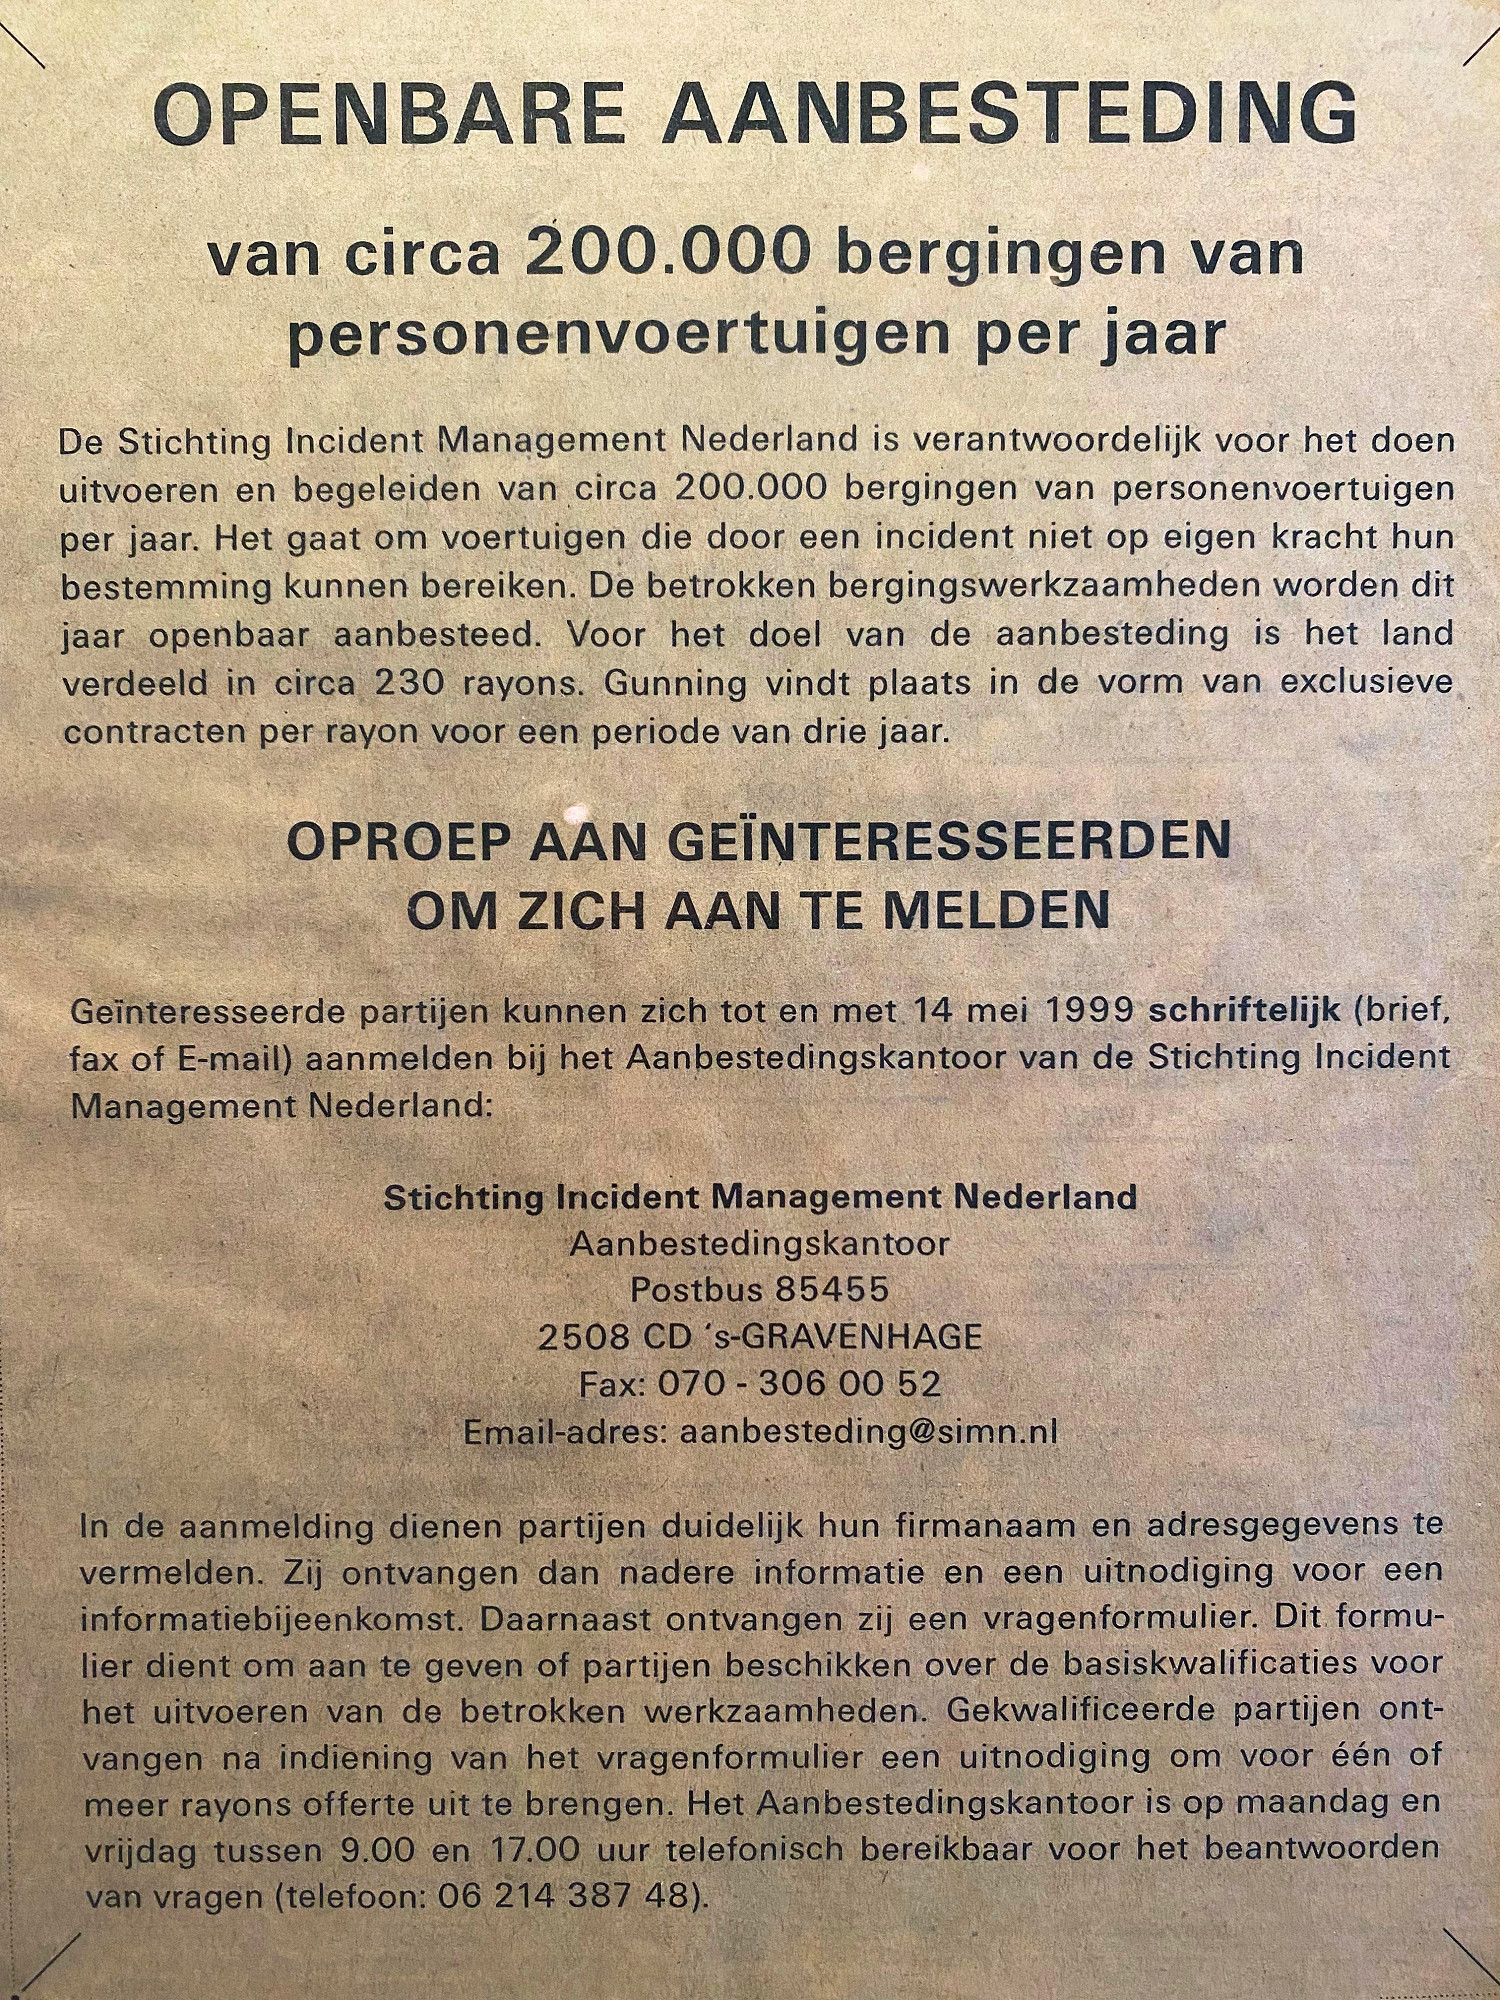 Call for participants in the first public tender procedure for recovery operations in De Telegraaf, 1999. As with that of 2002, this tender procedure related to all roads, not just IM roads.